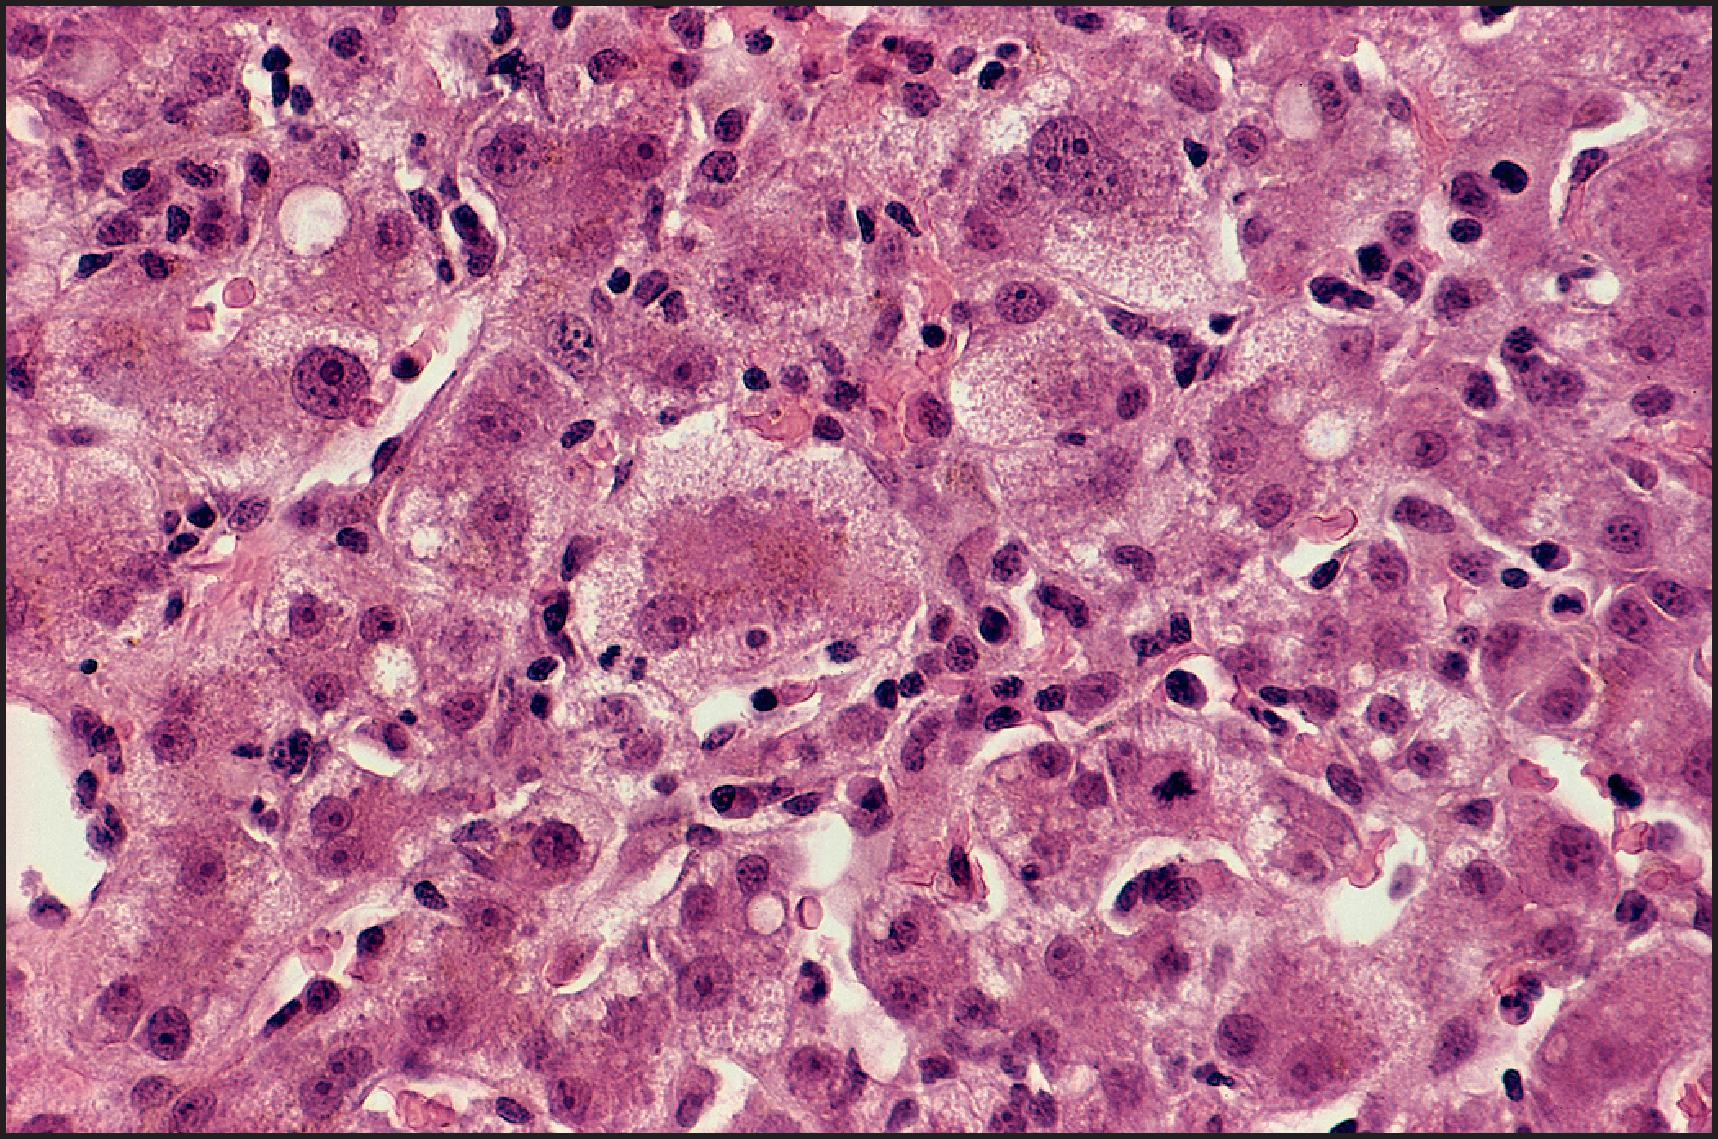 Figure 6.3, Classic acute hepatitis. Swollen hepatocytes are present, together with a mononuclear infiltrate in the sinusoids. Disarray of the plate architecture is caused by loss of hepatocytes. (H&E stain.)